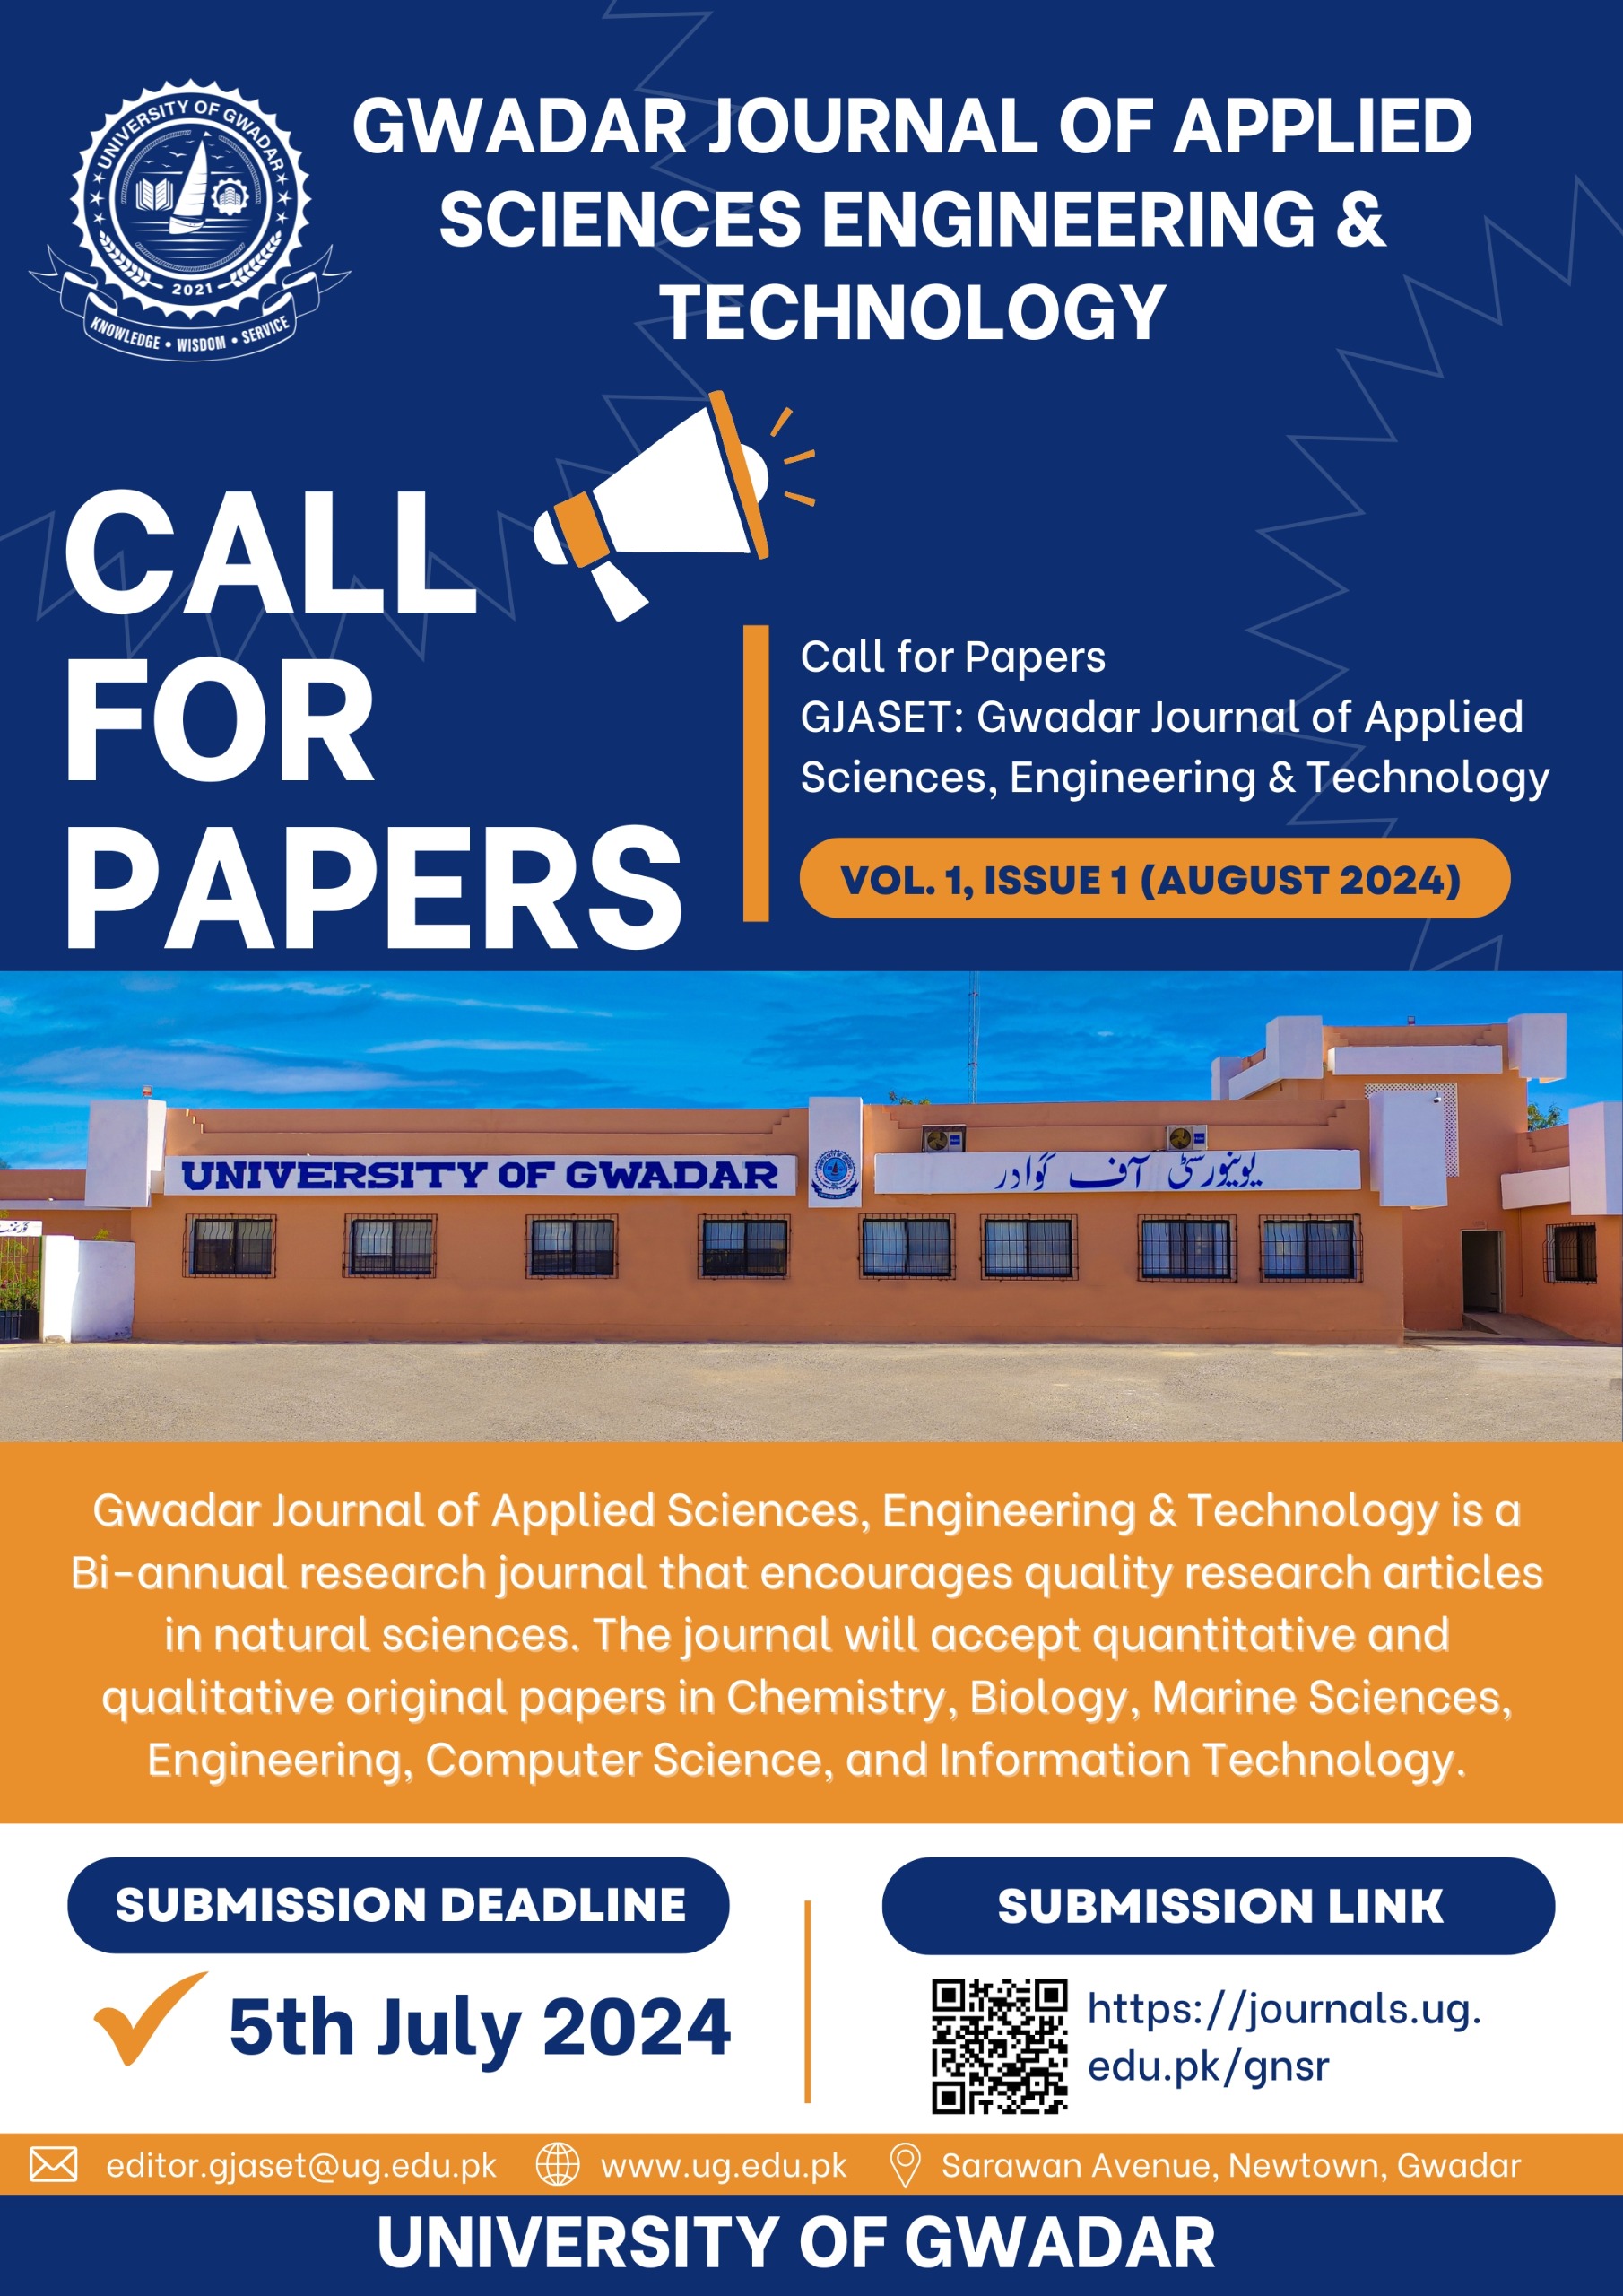 CALL FOR PAPERS